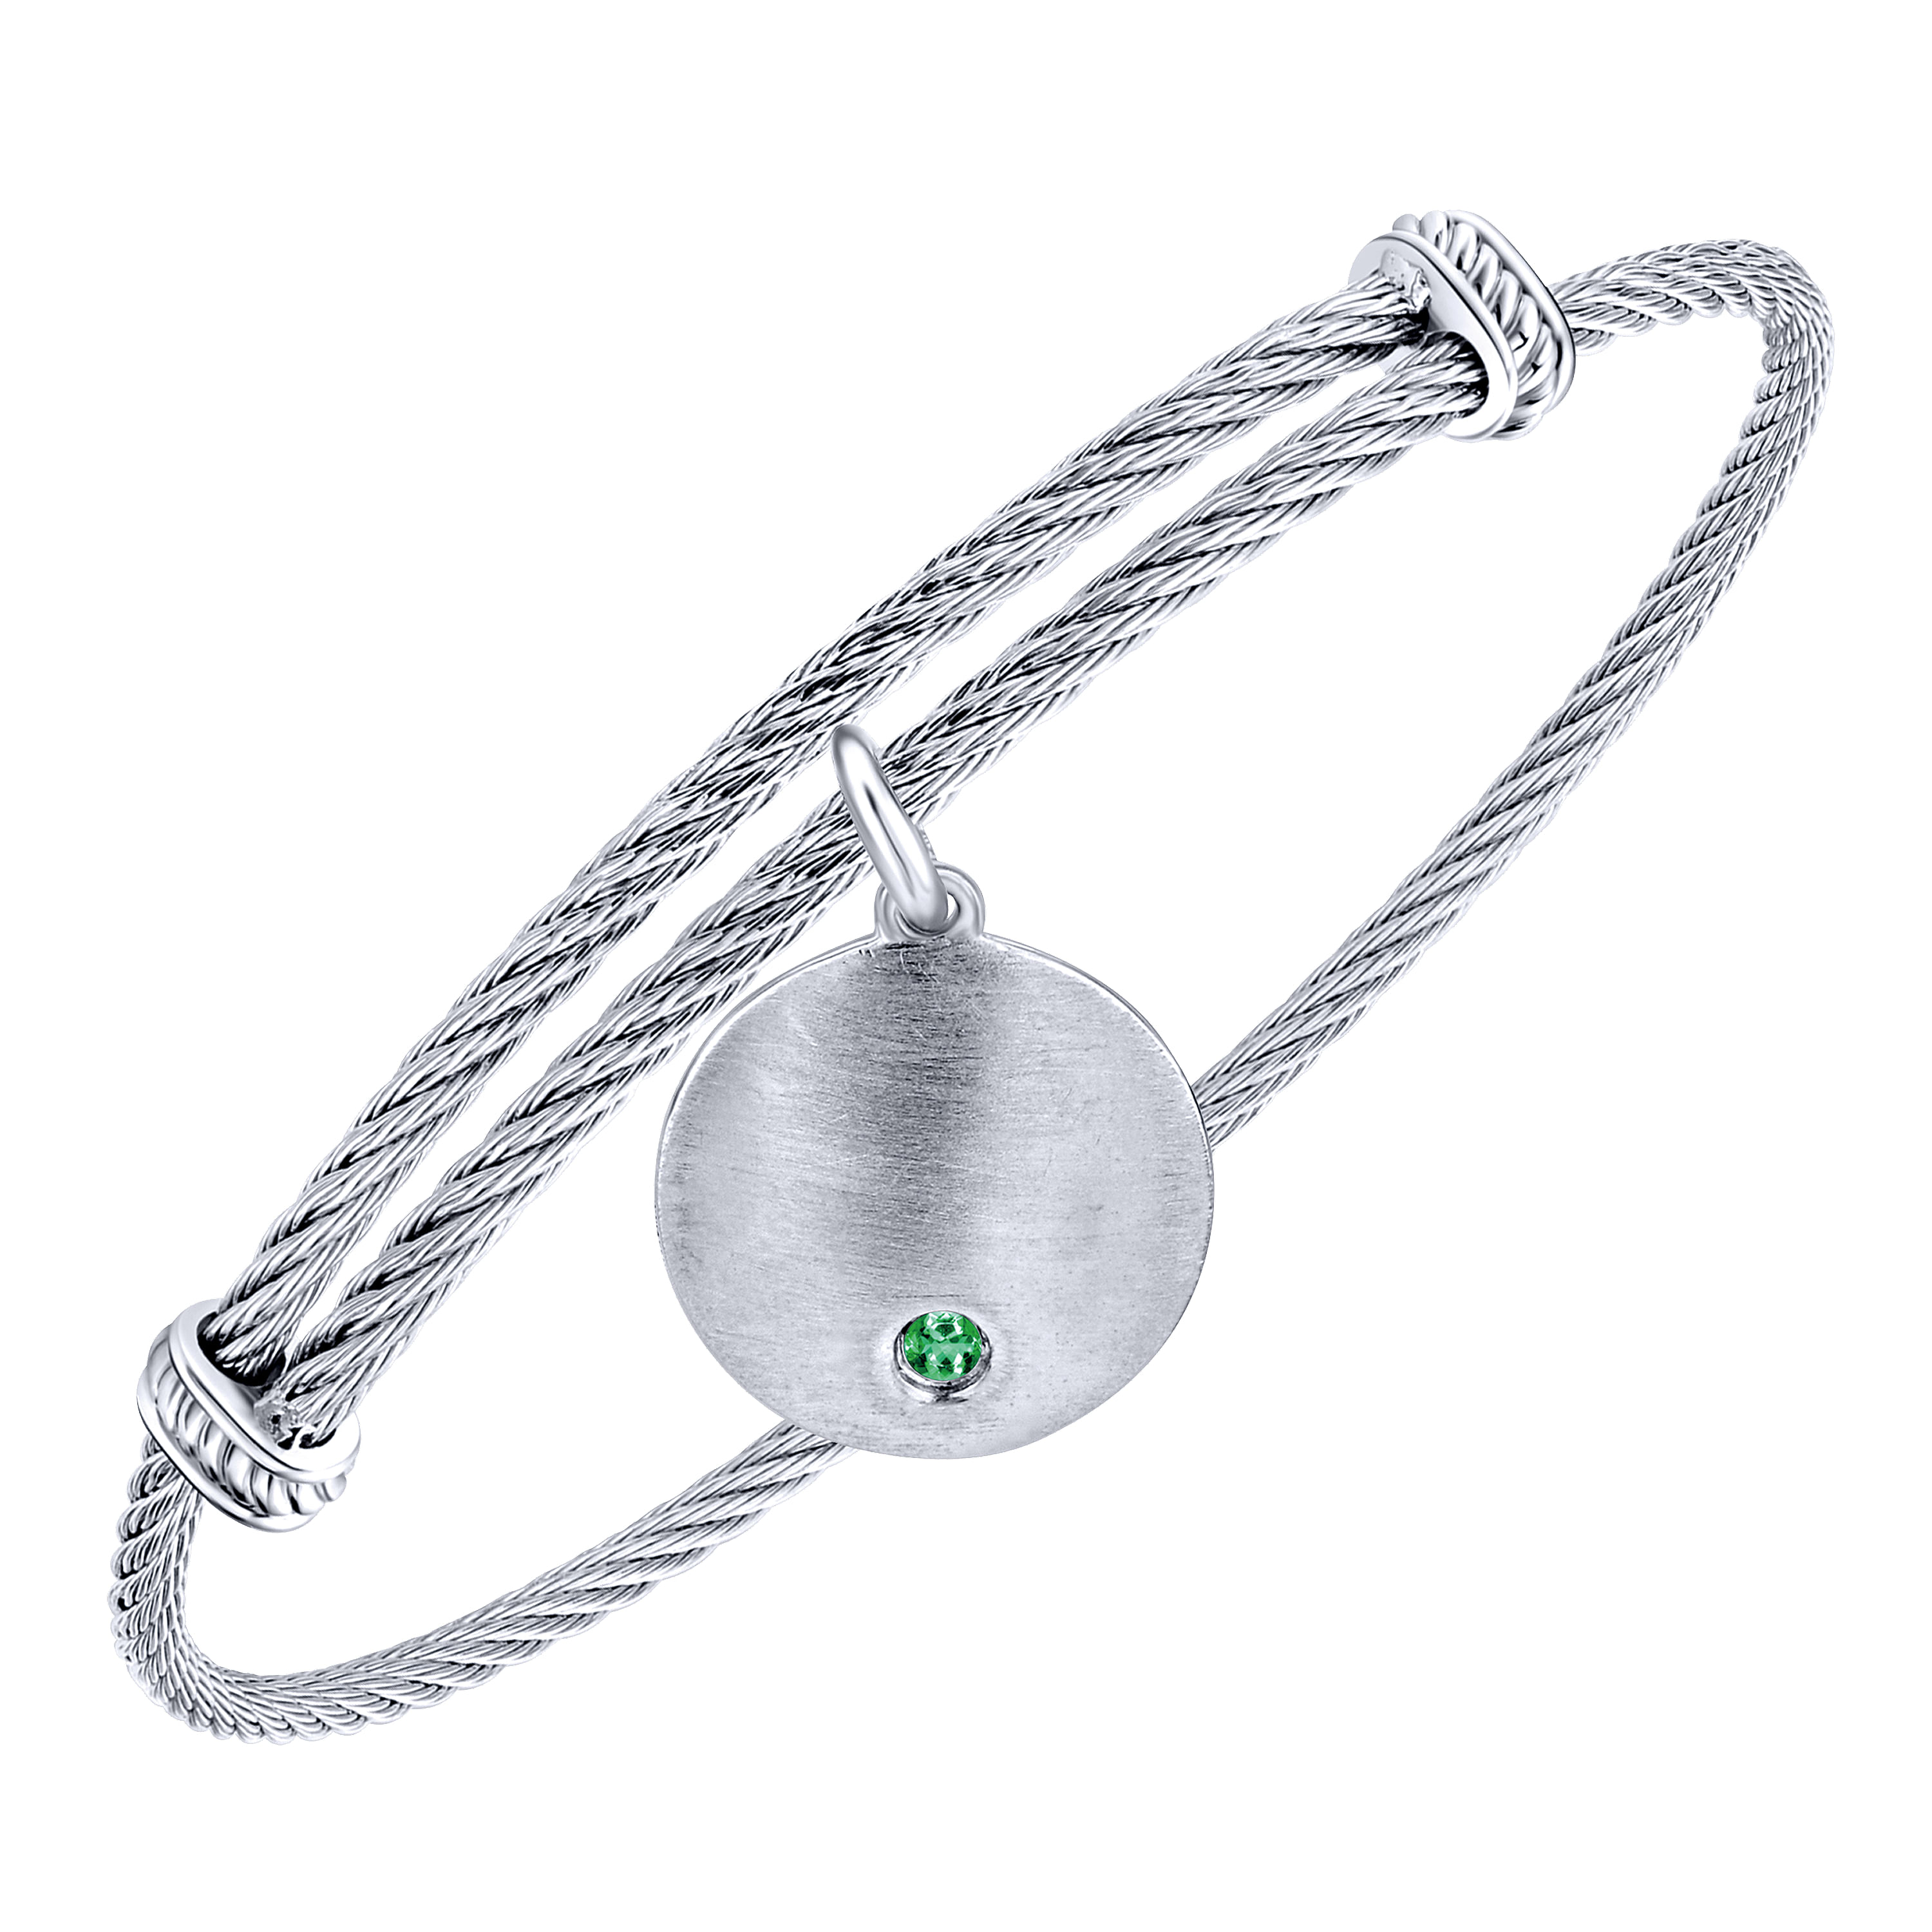 Adjustable Stainless Steel Bangle with Round Sterling Silver Emerald Stone Disc Charm